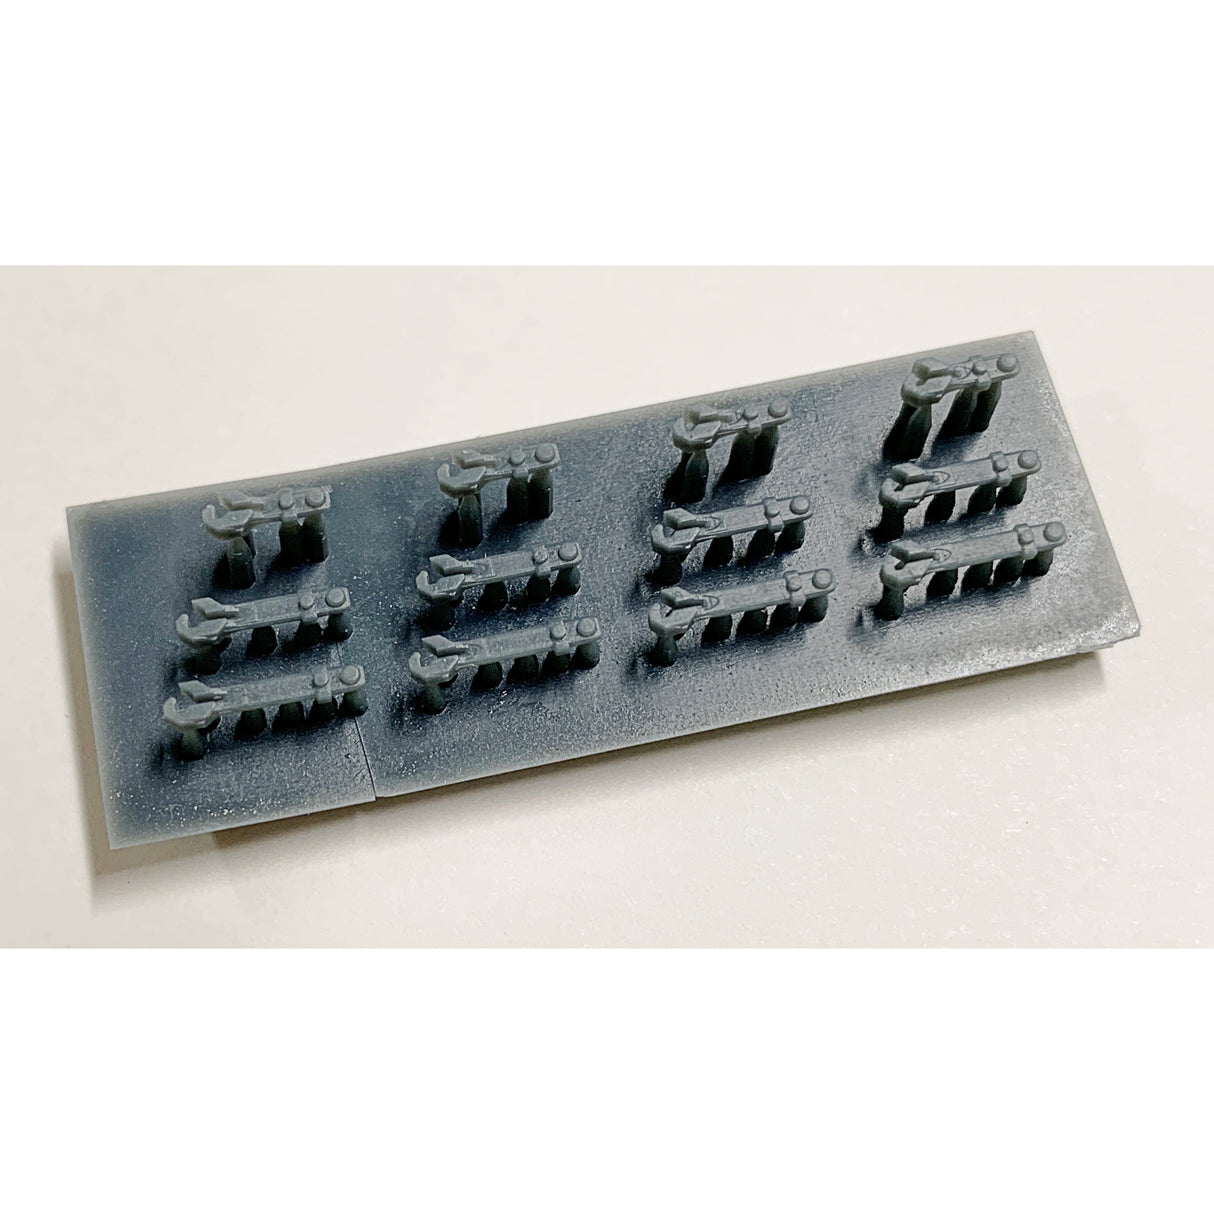 CCE Models T Scale (1:450) 1001 Snap-In CCE Coupler Assortment